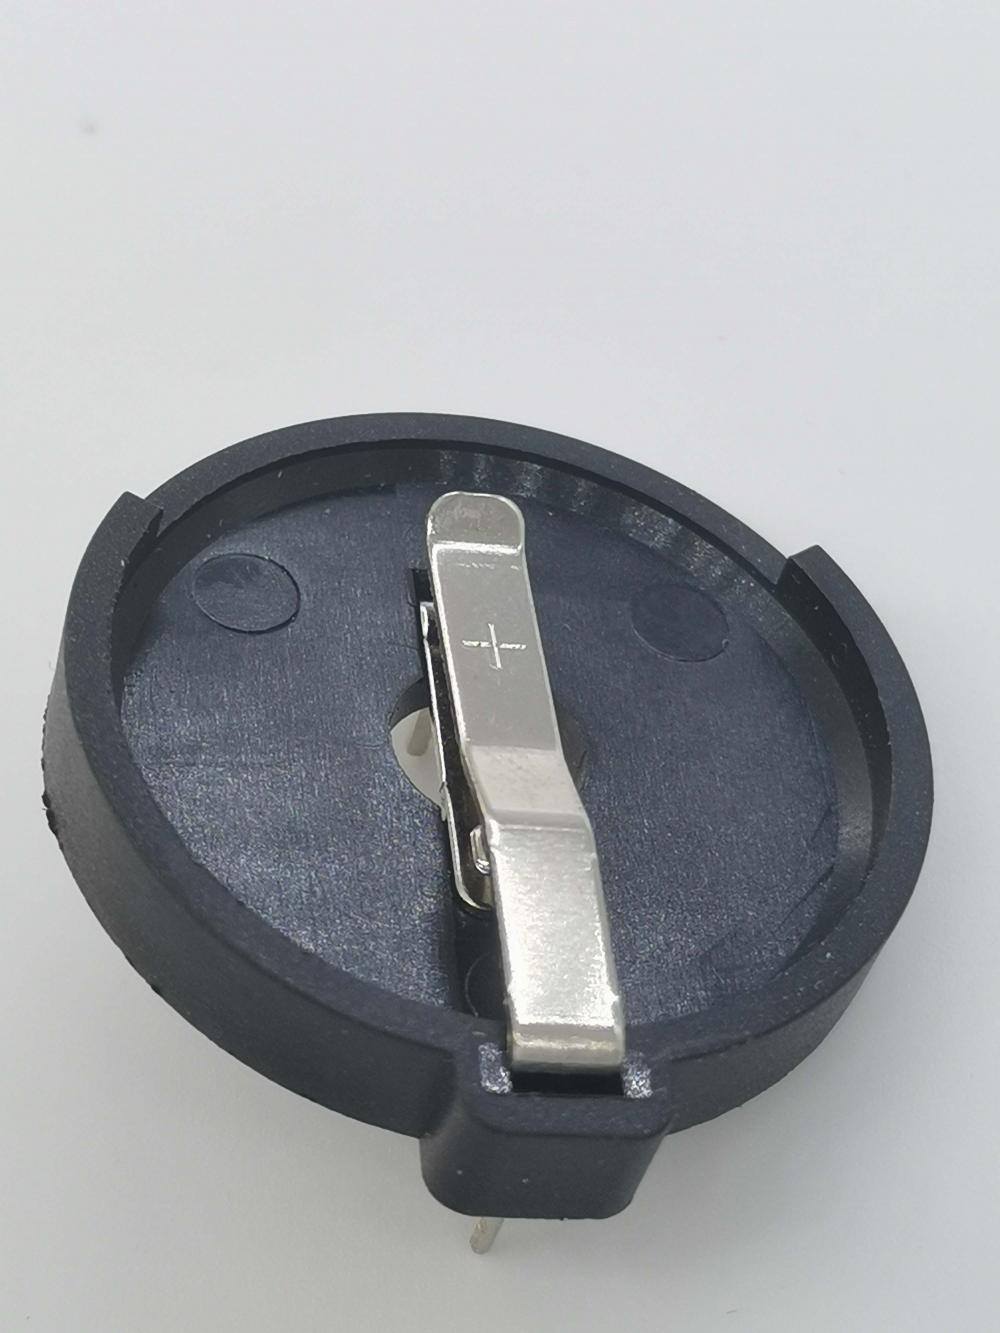 CR2430 lithium coin cell Holders THM